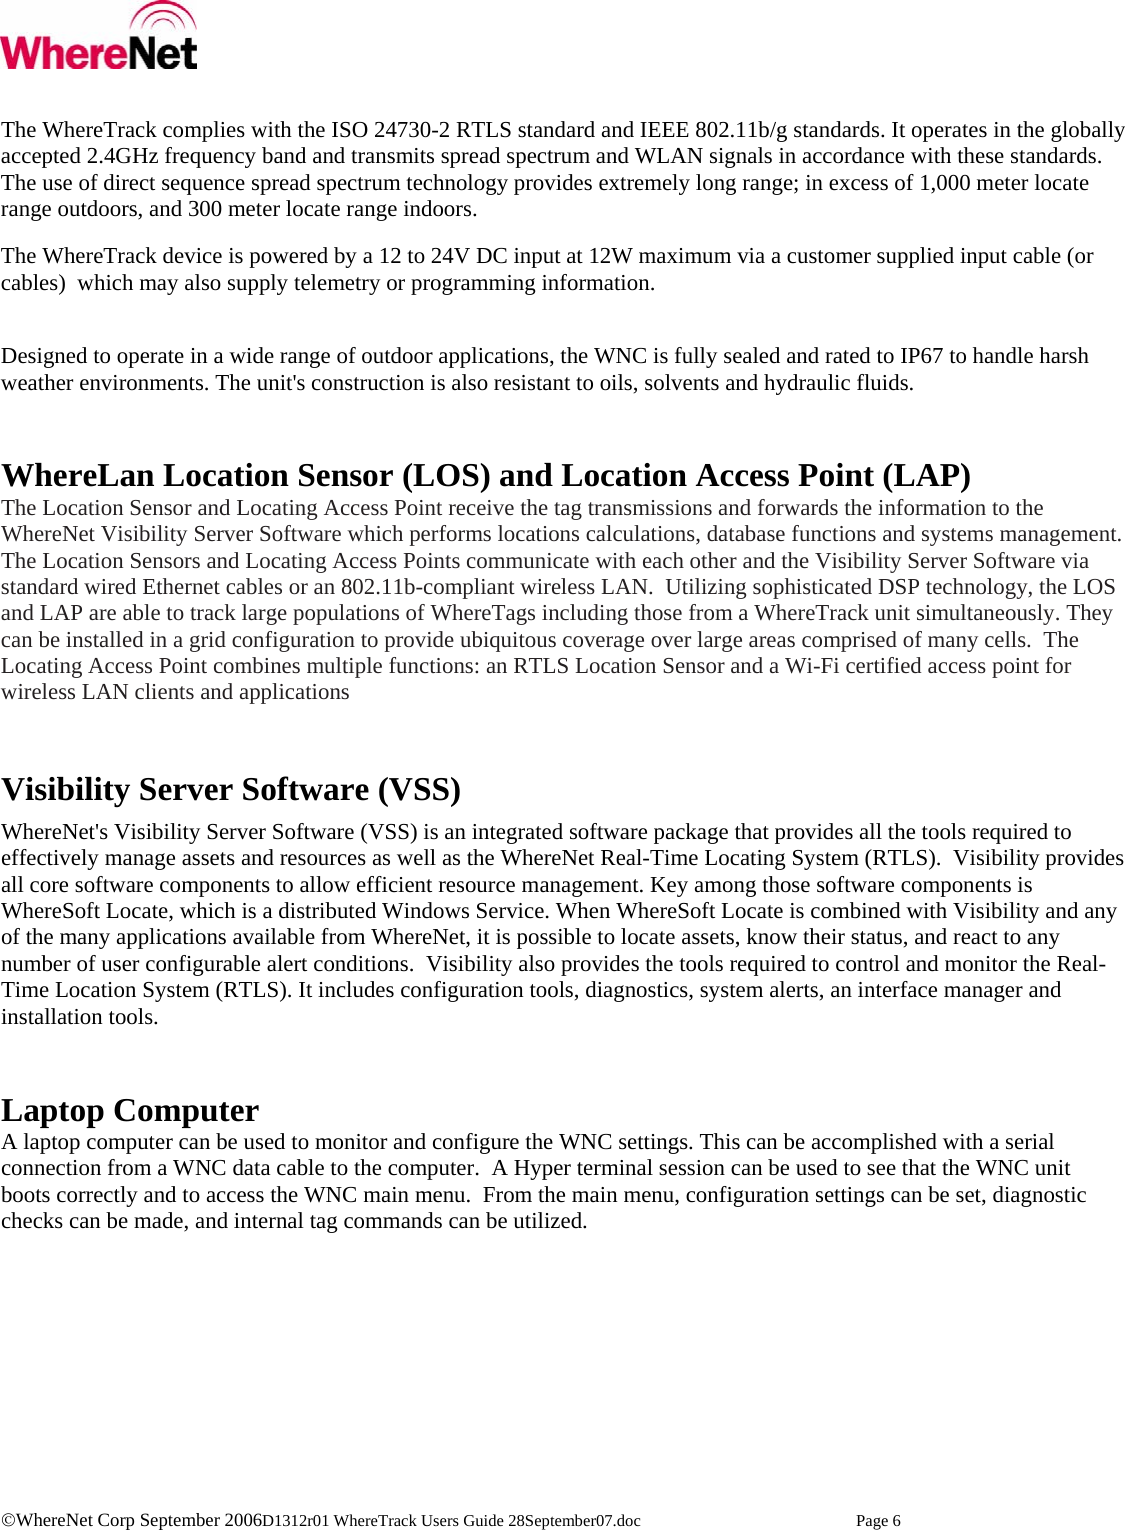    ©WhereNet Corp September 2006D1312r01 WhereTrack Users Guide 28September07.doc  Page 6  The WhereTrack complies with the ISO 24730-2 RTLS standard and IEEE 802.11b/g standards. It operates in the globally accepted 2.4GHz frequency band and transmits spread spectrum and WLAN signals in accordance with these standards. The use of direct sequence spread spectrum technology provides extremely long range; in excess of 1,000 meter locate range outdoors, and 300 meter locate range indoors.  The WhereTrack device is powered by a 12 to 24V DC input at 12W maximum via a customer supplied input cable (or cables)  which may also supply telemetry or programming information.  Designed to operate in a wide range of outdoor applications, the WNC is fully sealed and rated to IP67 to handle harsh weather environments. The unit&apos;s construction is also resistant to oils, solvents and hydraulic fluids.   WhereLan Location Sensor (LOS) and Location Access Point (LAP) The Location Sensor and Locating Access Point receive the tag transmissions and forwards the information to the WhereNet Visibility Server Software which performs locations calculations, database functions and systems management. The Location Sensors and Locating Access Points communicate with each other and the Visibility Server Software via standard wired Ethernet cables or an 802.11b-compliant wireless LAN.  Utilizing sophisticated DSP technology, the LOS and LAP are able to track large populations of WhereTags including those from a WhereTrack unit simultaneously. They can be installed in a grid configuration to provide ubiquitous coverage over large areas comprised of many cells.  The Locating Access Point combines multiple functions: an RTLS Location Sensor and a Wi-Fi certified access point for wireless LAN clients and applications   Visibility Server Software (VSS) WhereNet&apos;s Visibility Server Software (VSS) is an integrated software package that provides all the tools required to effectively manage assets and resources as well as the WhereNet Real-Time Locating System (RTLS).  Visibility provides all core software components to allow efficient resource management. Key among those software components is WhereSoft Locate, which is a distributed Windows Service. When WhereSoft Locate is combined with Visibility and any of the many applications available from WhereNet, it is possible to locate assets, know their status, and react to any number of user configurable alert conditions.  Visibility also provides the tools required to control and monitor the Real-Time Location System (RTLS). It includes configuration tools, diagnostics, system alerts, an interface manager and installation tools.    Laptop Computer A laptop computer can be used to monitor and configure the WNC settings. This can be accomplished with a serial connection from a WNC data cable to the computer.  A Hyper terminal session can be used to see that the WNC unit boots correctly and to access the WNC main menu.  From the main menu, configuration settings can be set, diagnostic checks can be made, and internal tag commands can be utilized.   